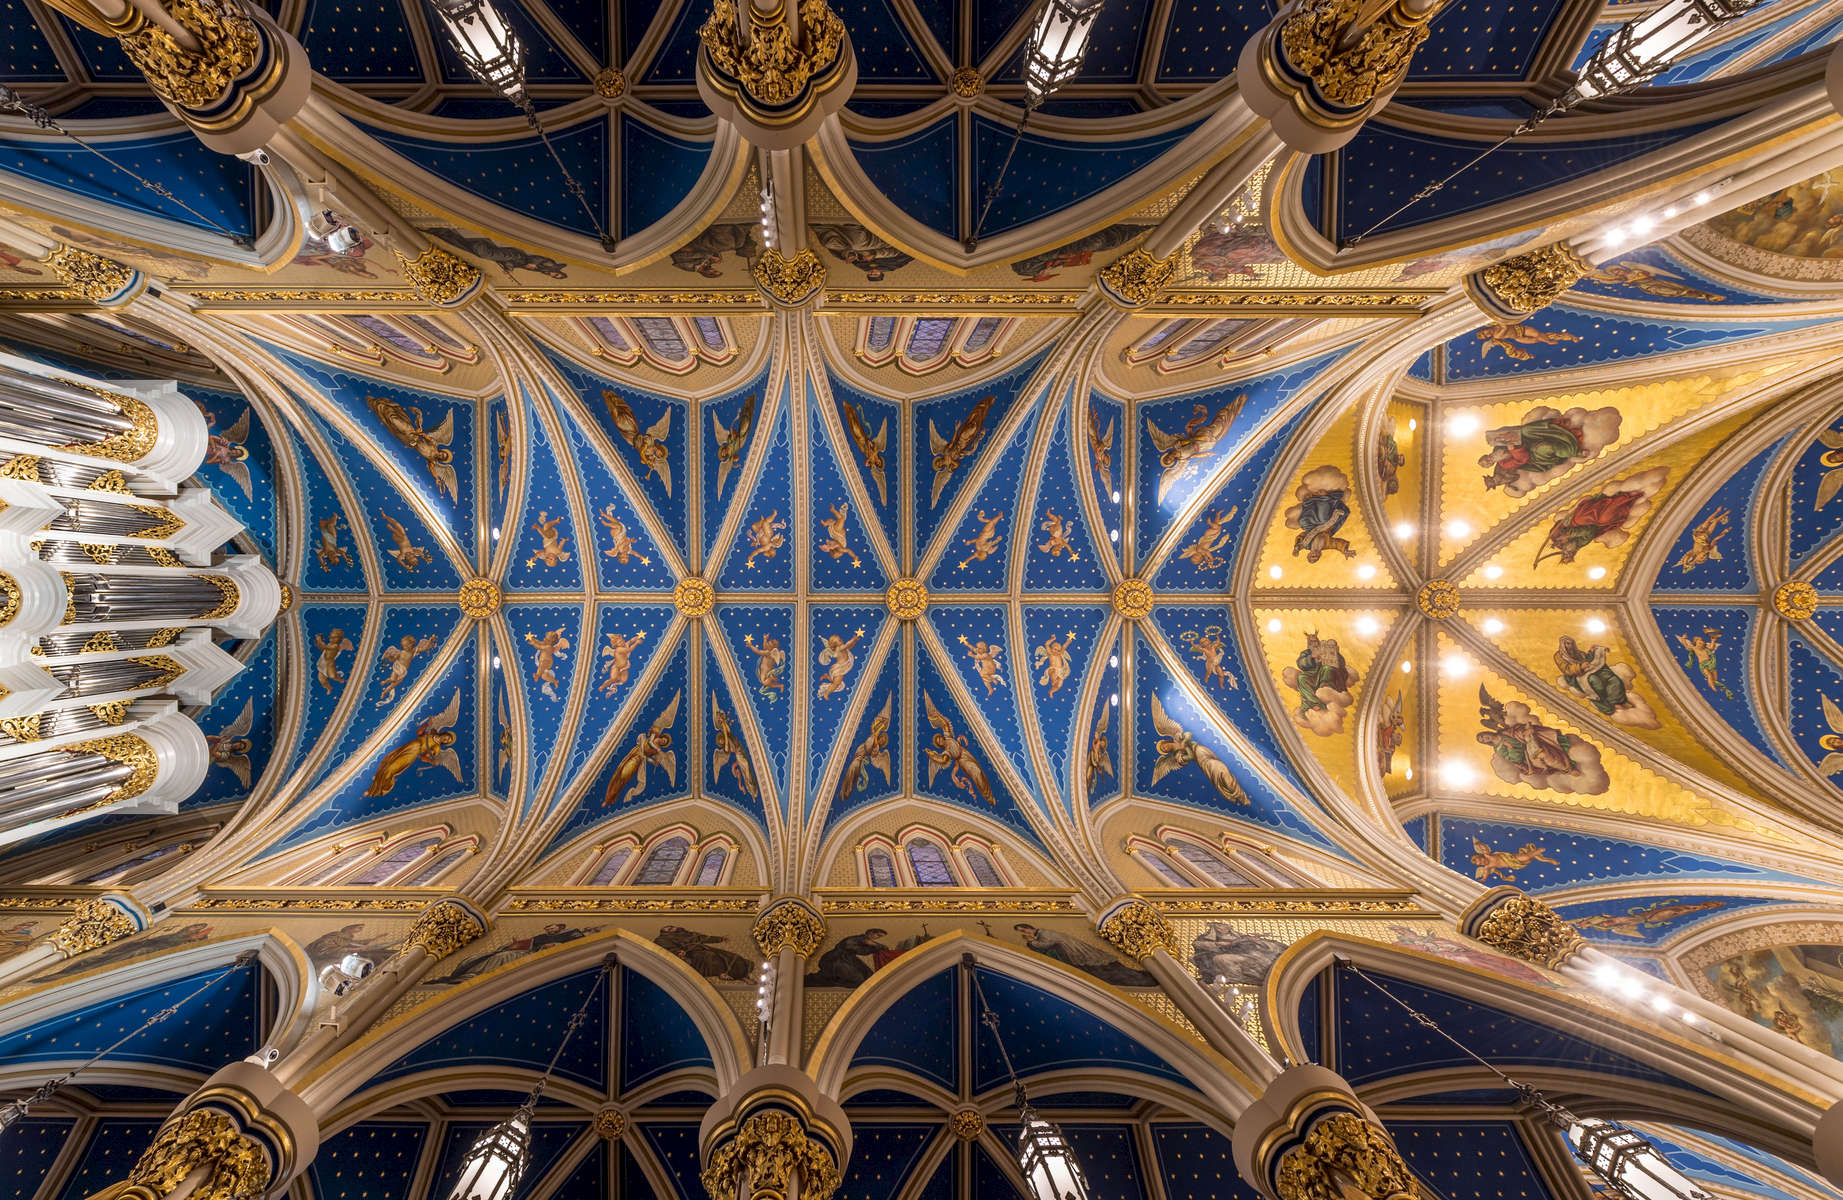 March 31, 2018; Basilica of the Sacred Heart ceiling. (Photo by Barbara Johnston/University of Notre Dame)